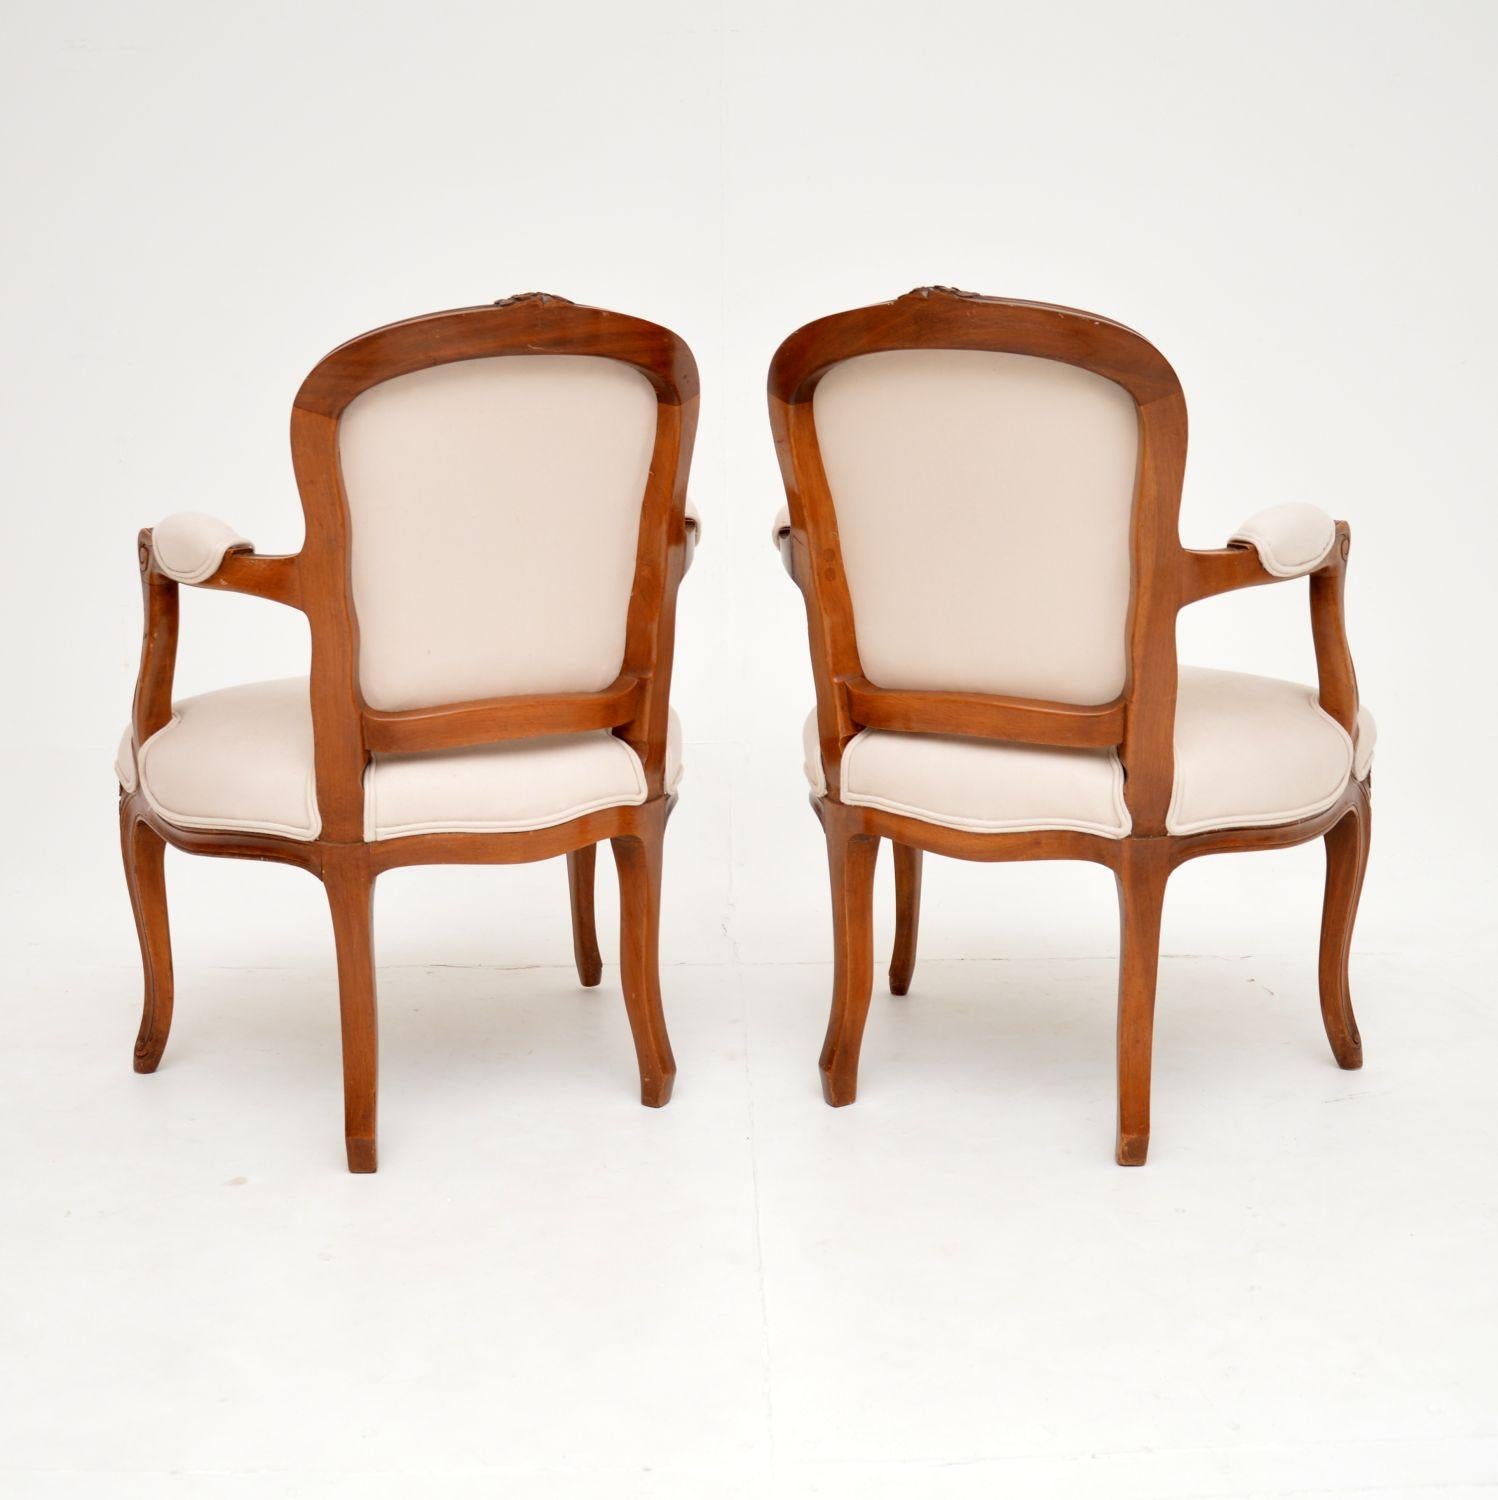 20th Century Pair of Antique French Walnut Salon Chairs